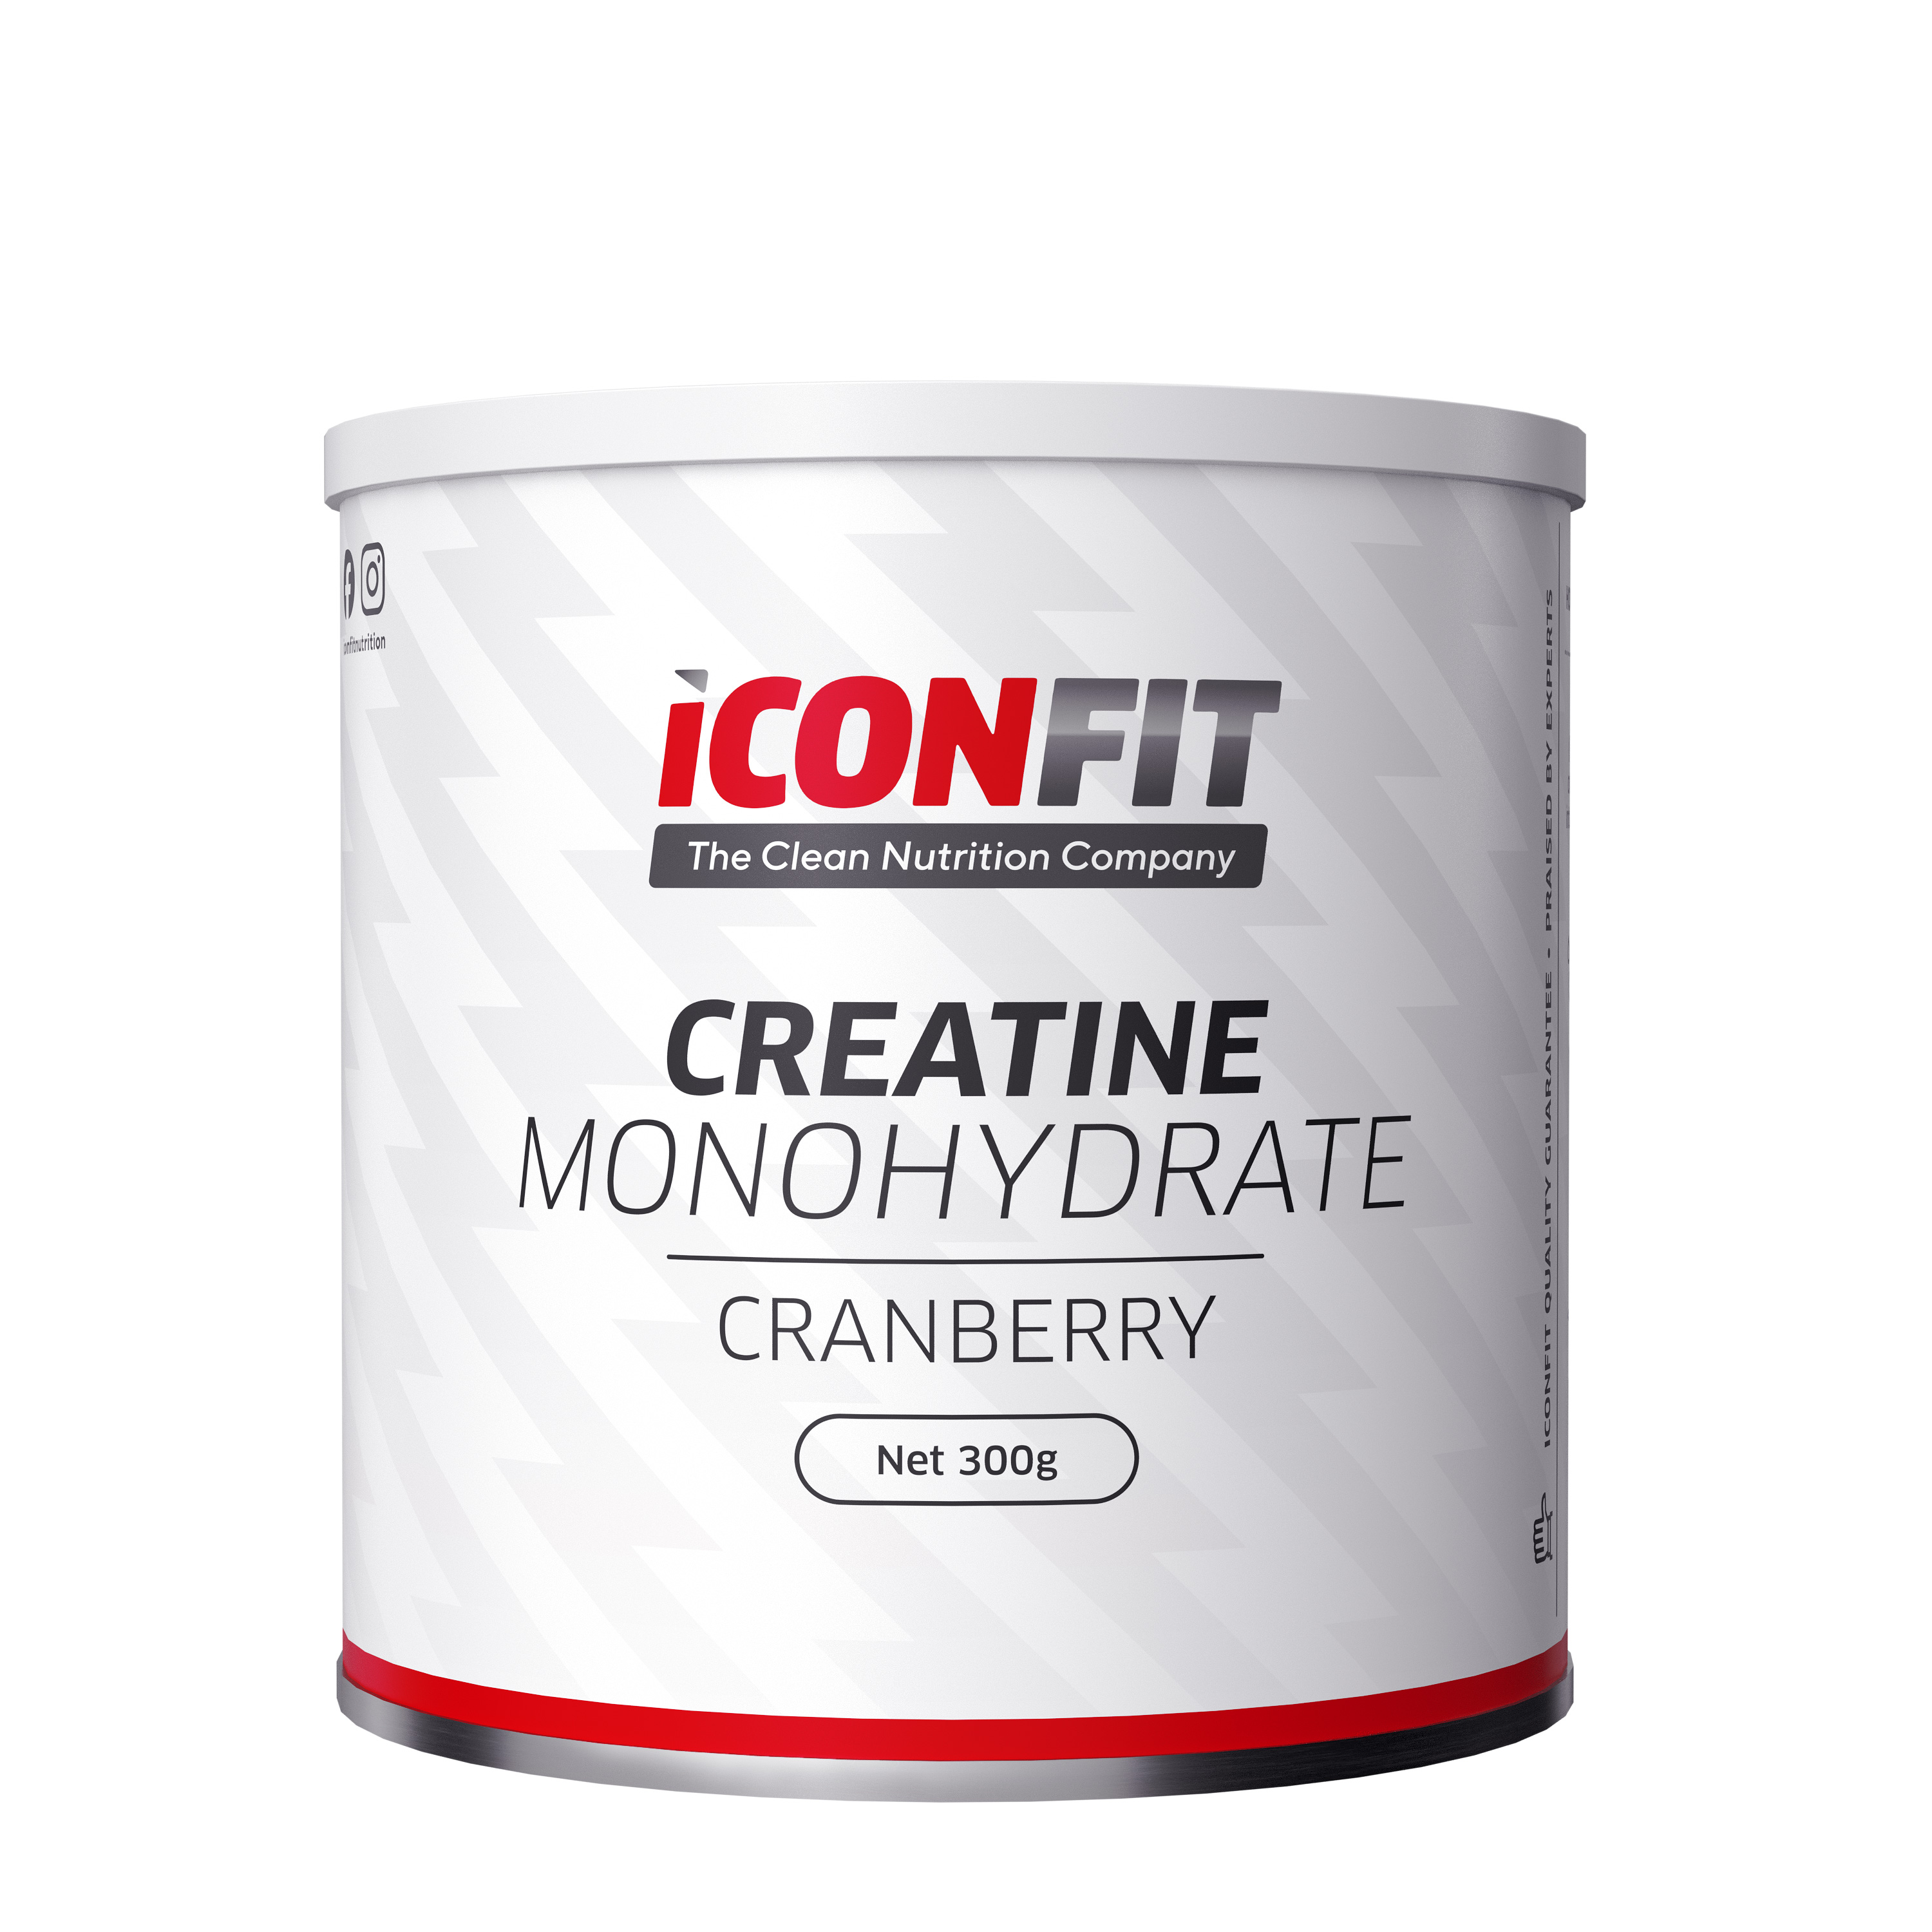 ICONFIT-Micronised-Creatine-Monohydrate-Granberry-300g